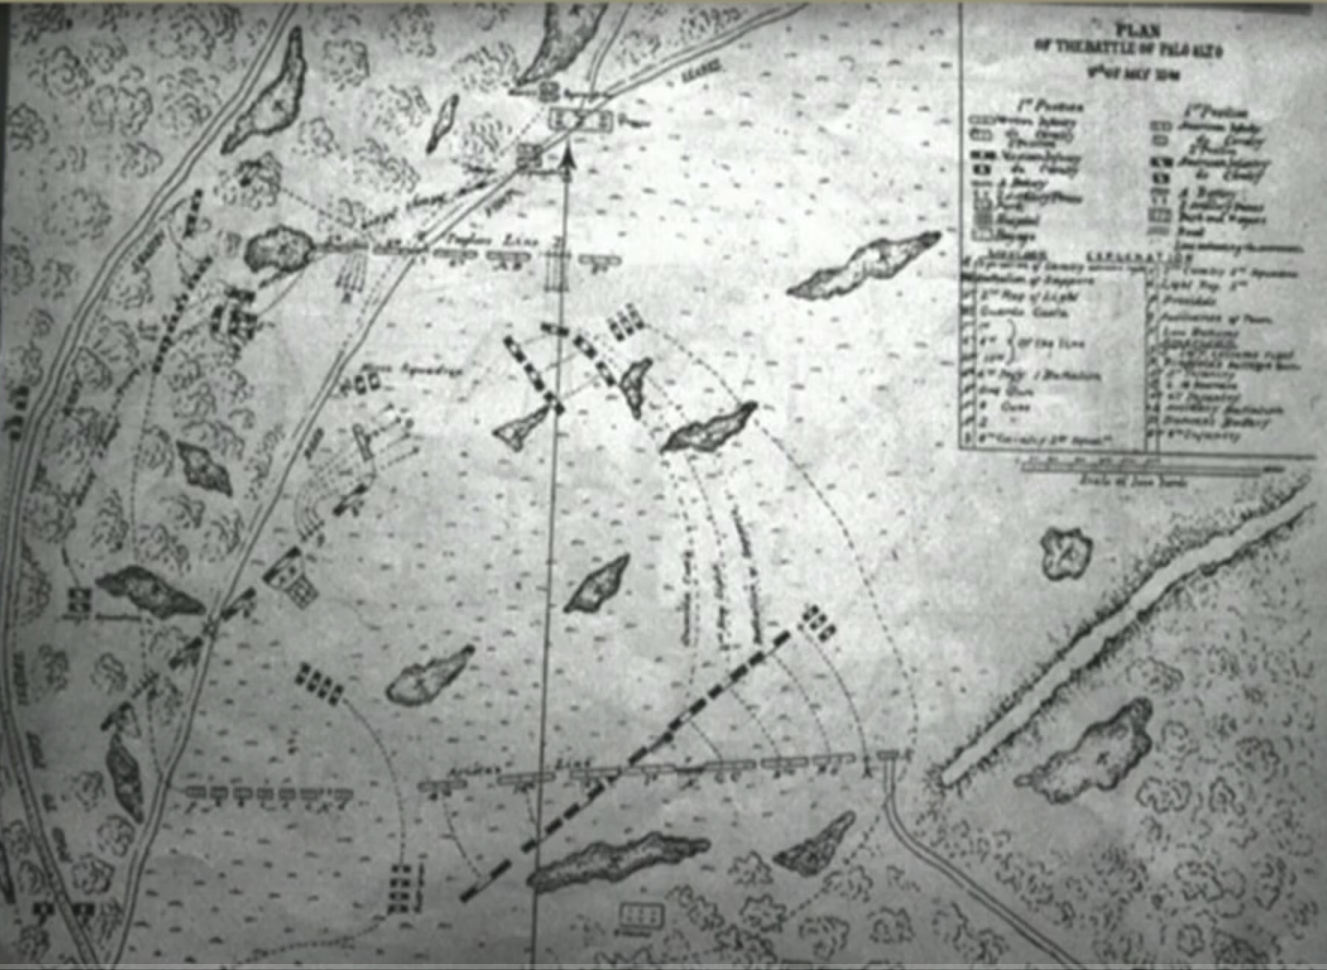 Sketch map of battlefield depicting lines, unit maneuvers, and engagements.